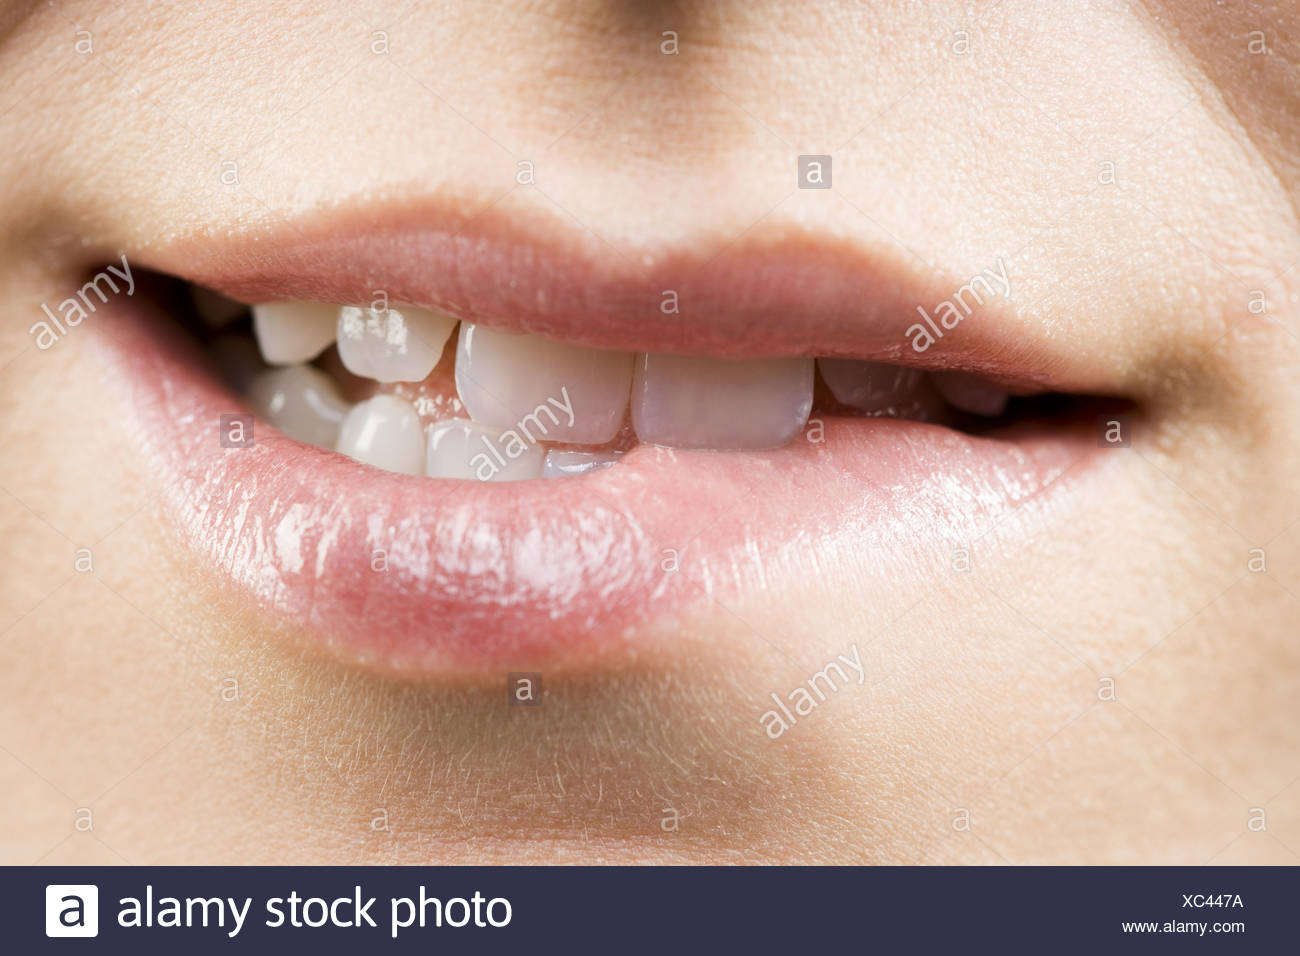 close-up-of-a-woman-biting-her-lower-lip-XC447A.jpg